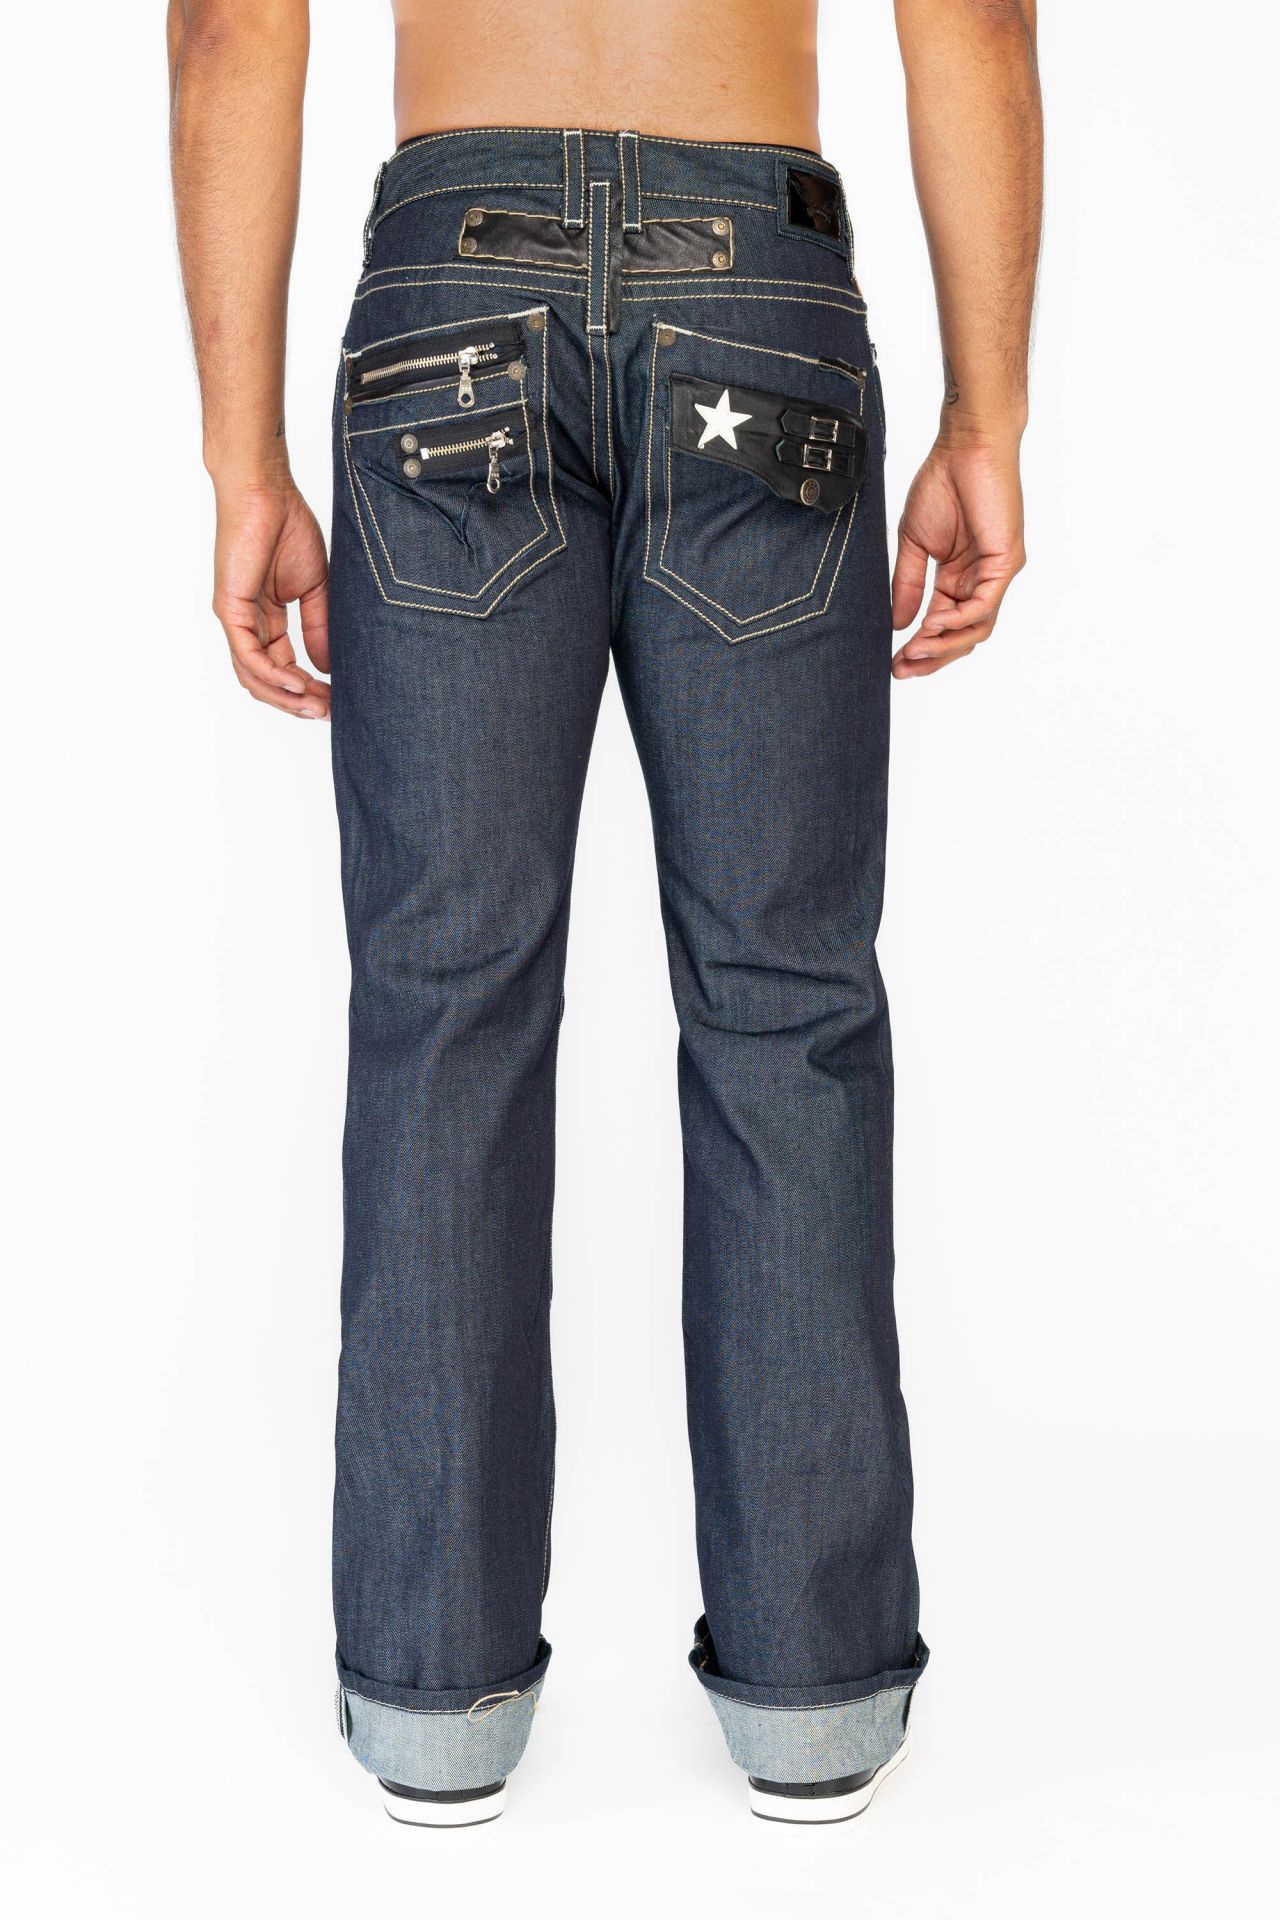 RAW DENIM MENS BOOT CUT JEANS WITH CONTRAST STITCHING AND LEATHER INSERTS